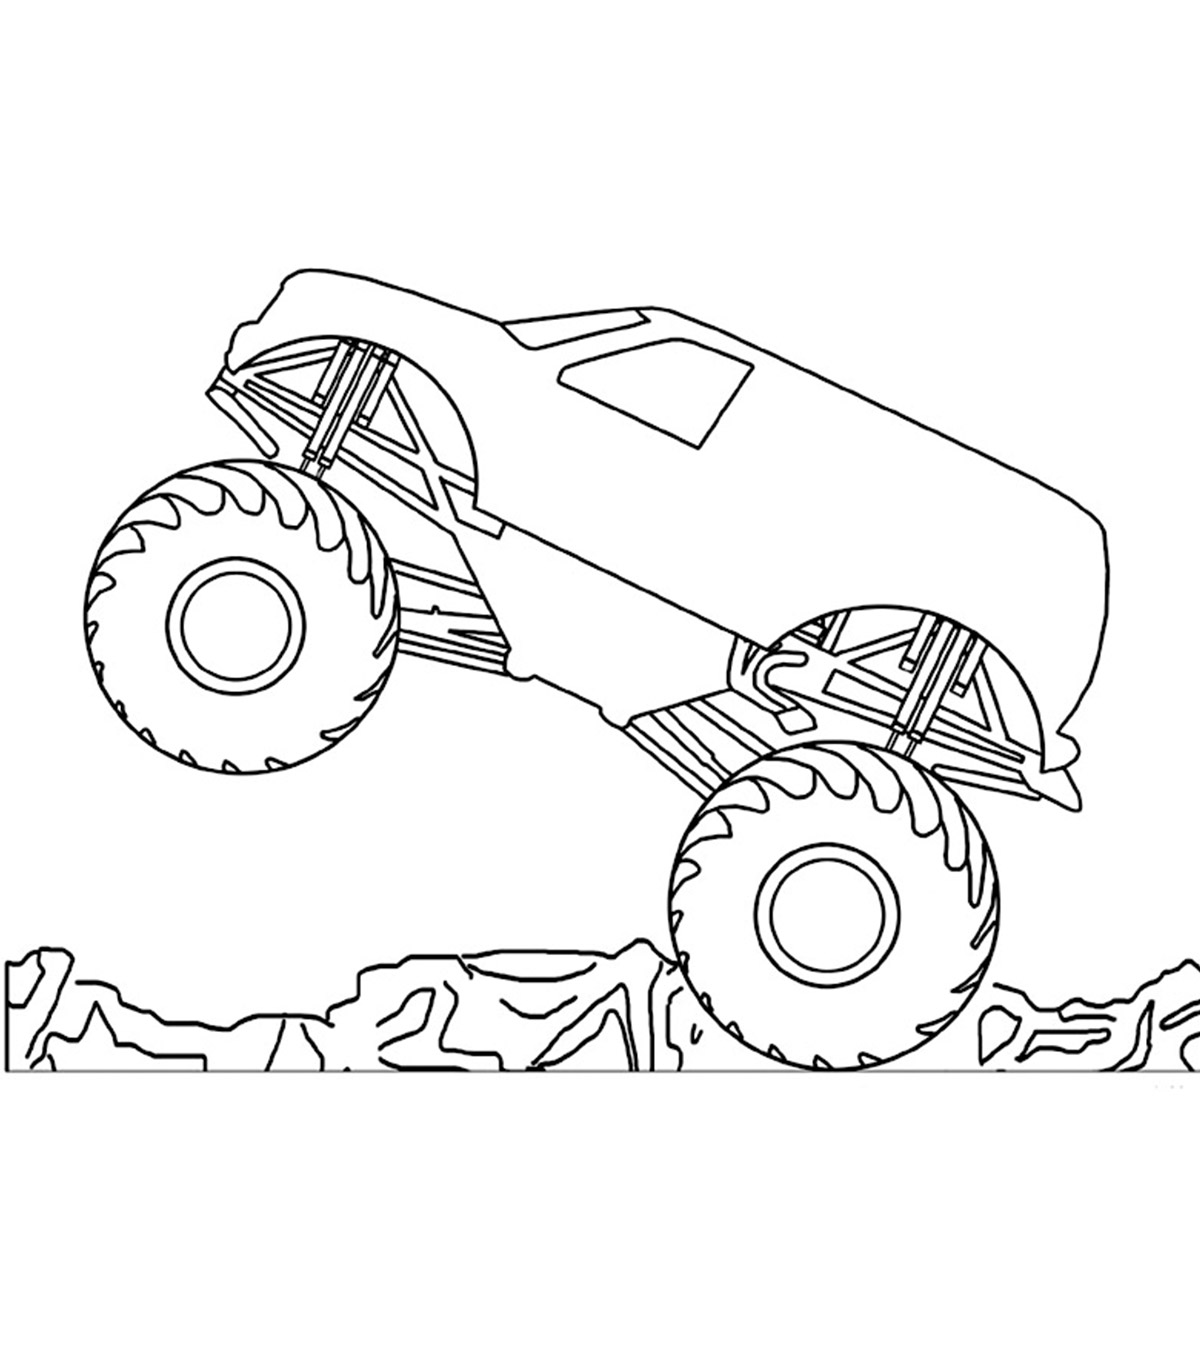 Download Backhoe Coloring Pages - Coloring Home